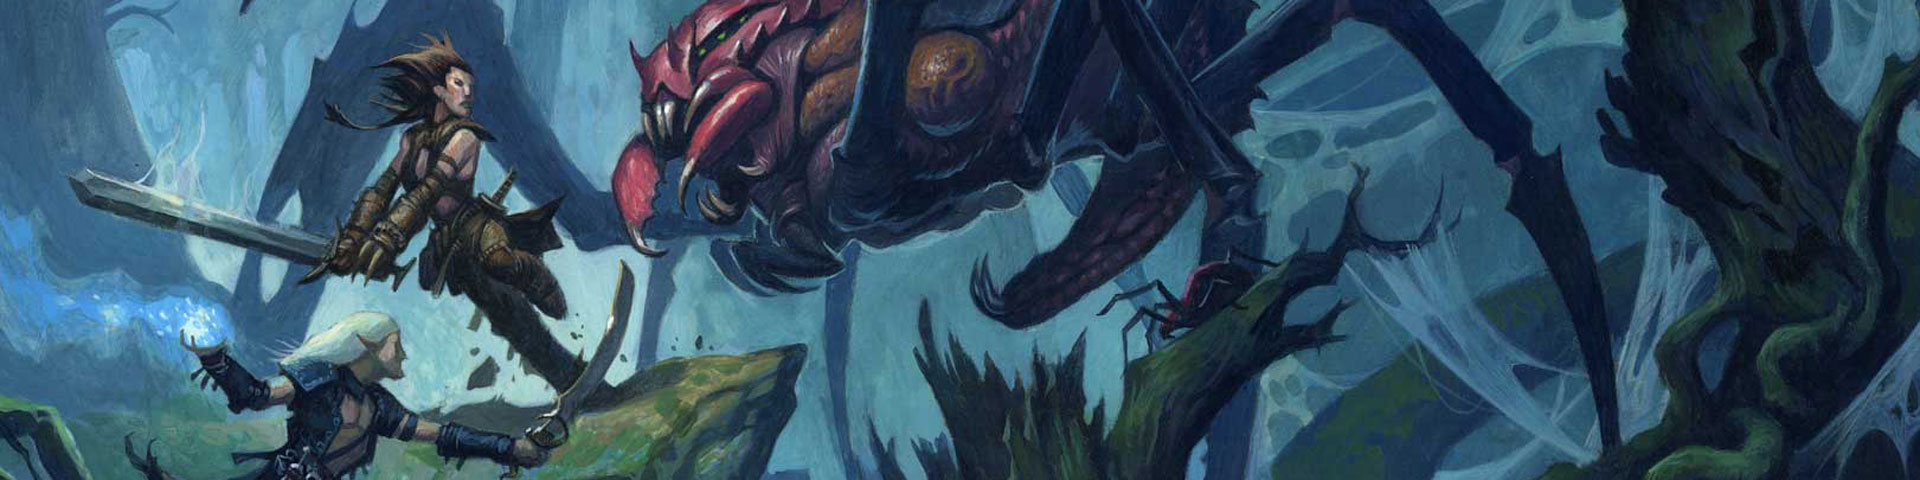 Two adventurers battle a giant spider in an underground cave.